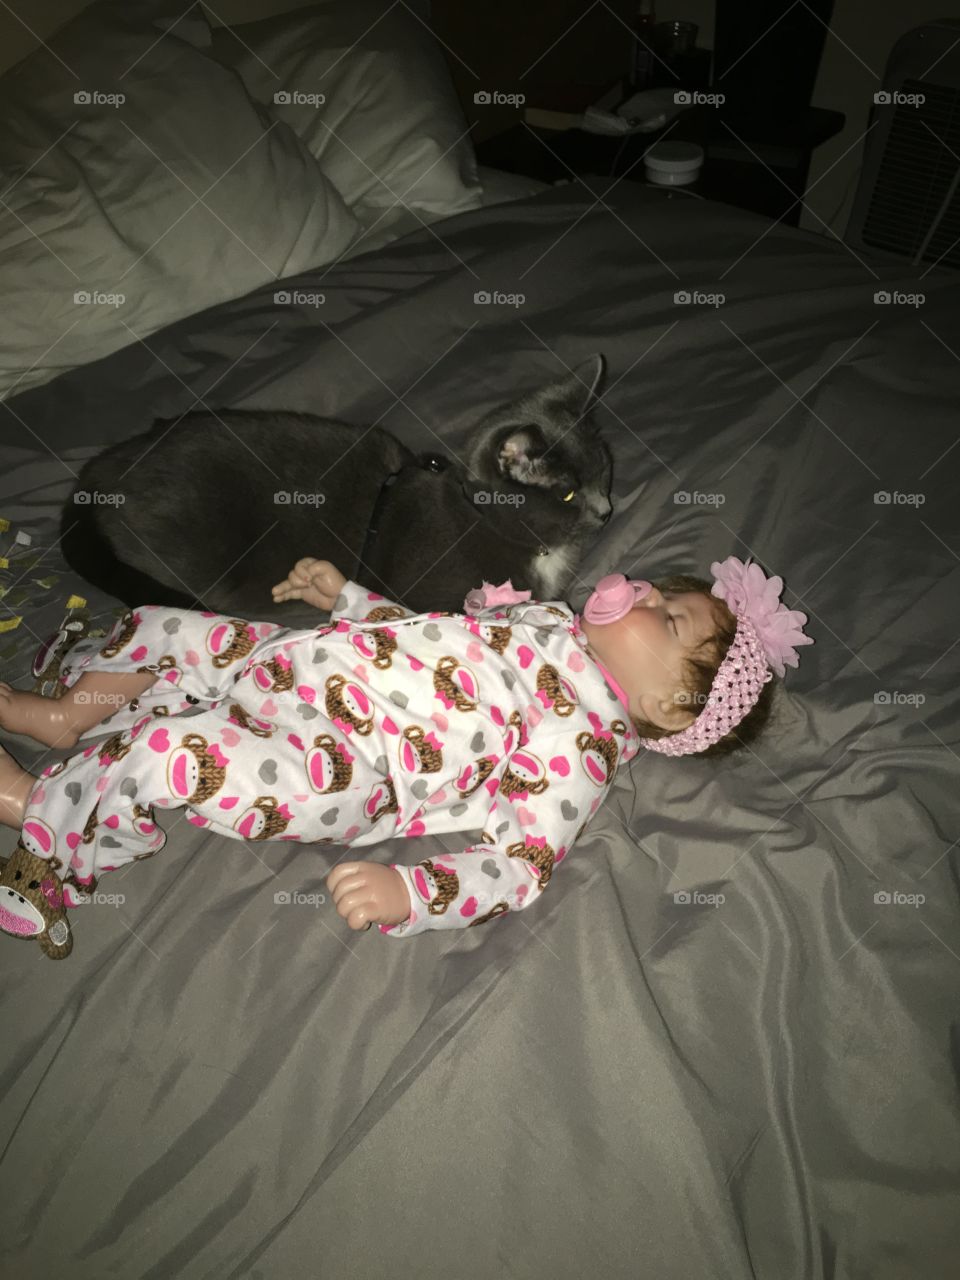 Cat cuddling up to a doll